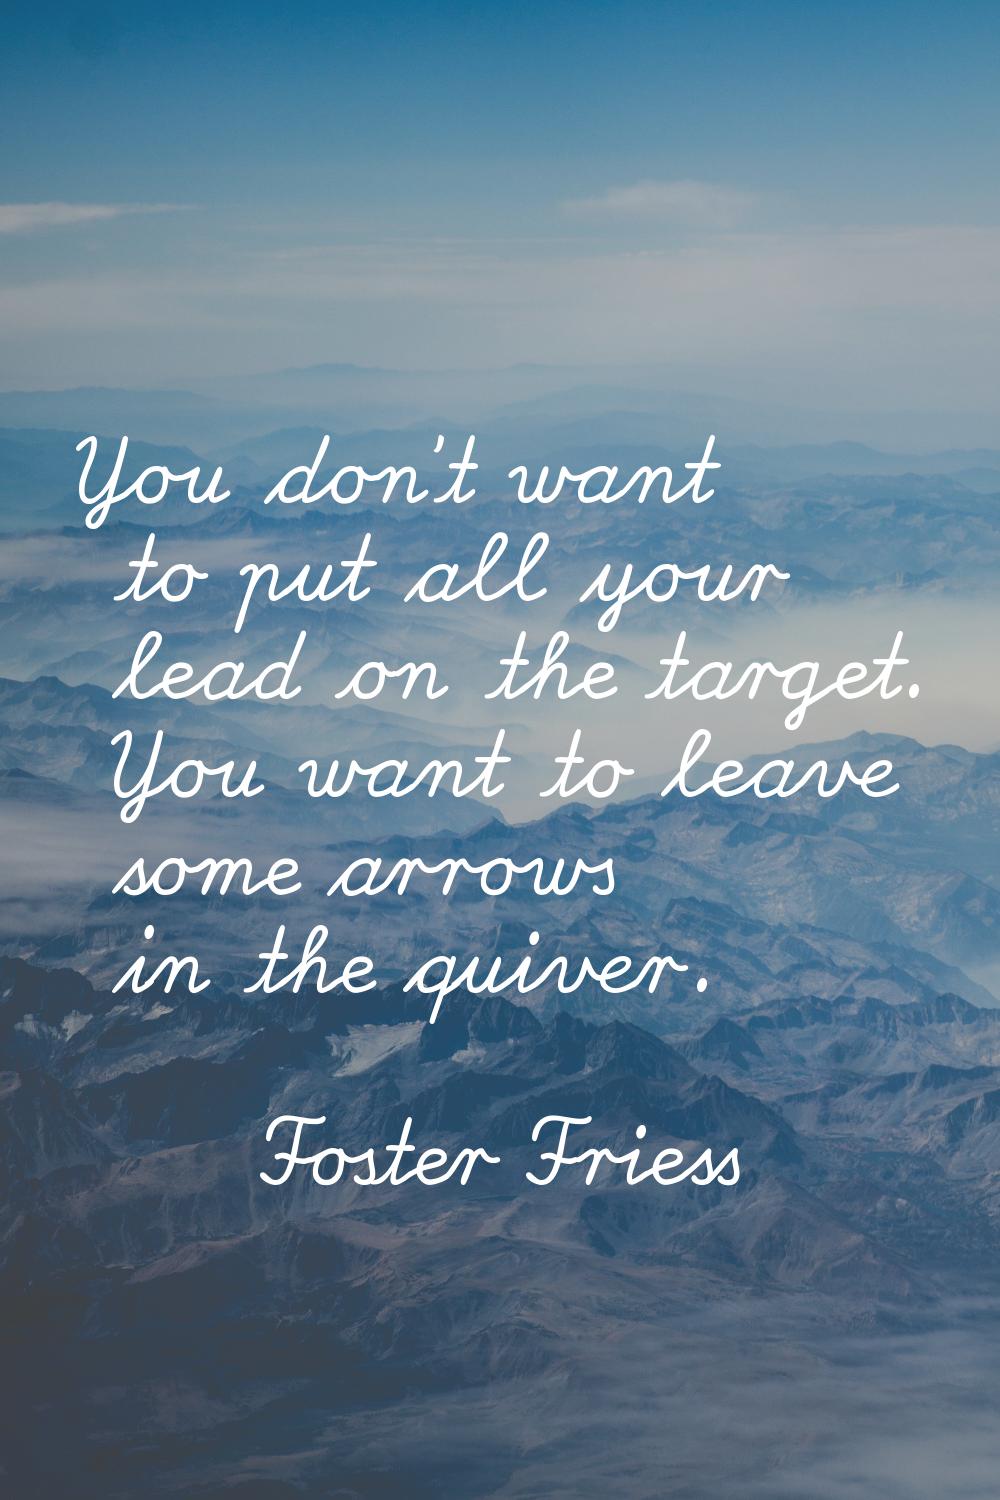 You don't want to put all your lead on the target. You want to leave some arrows in the quiver.